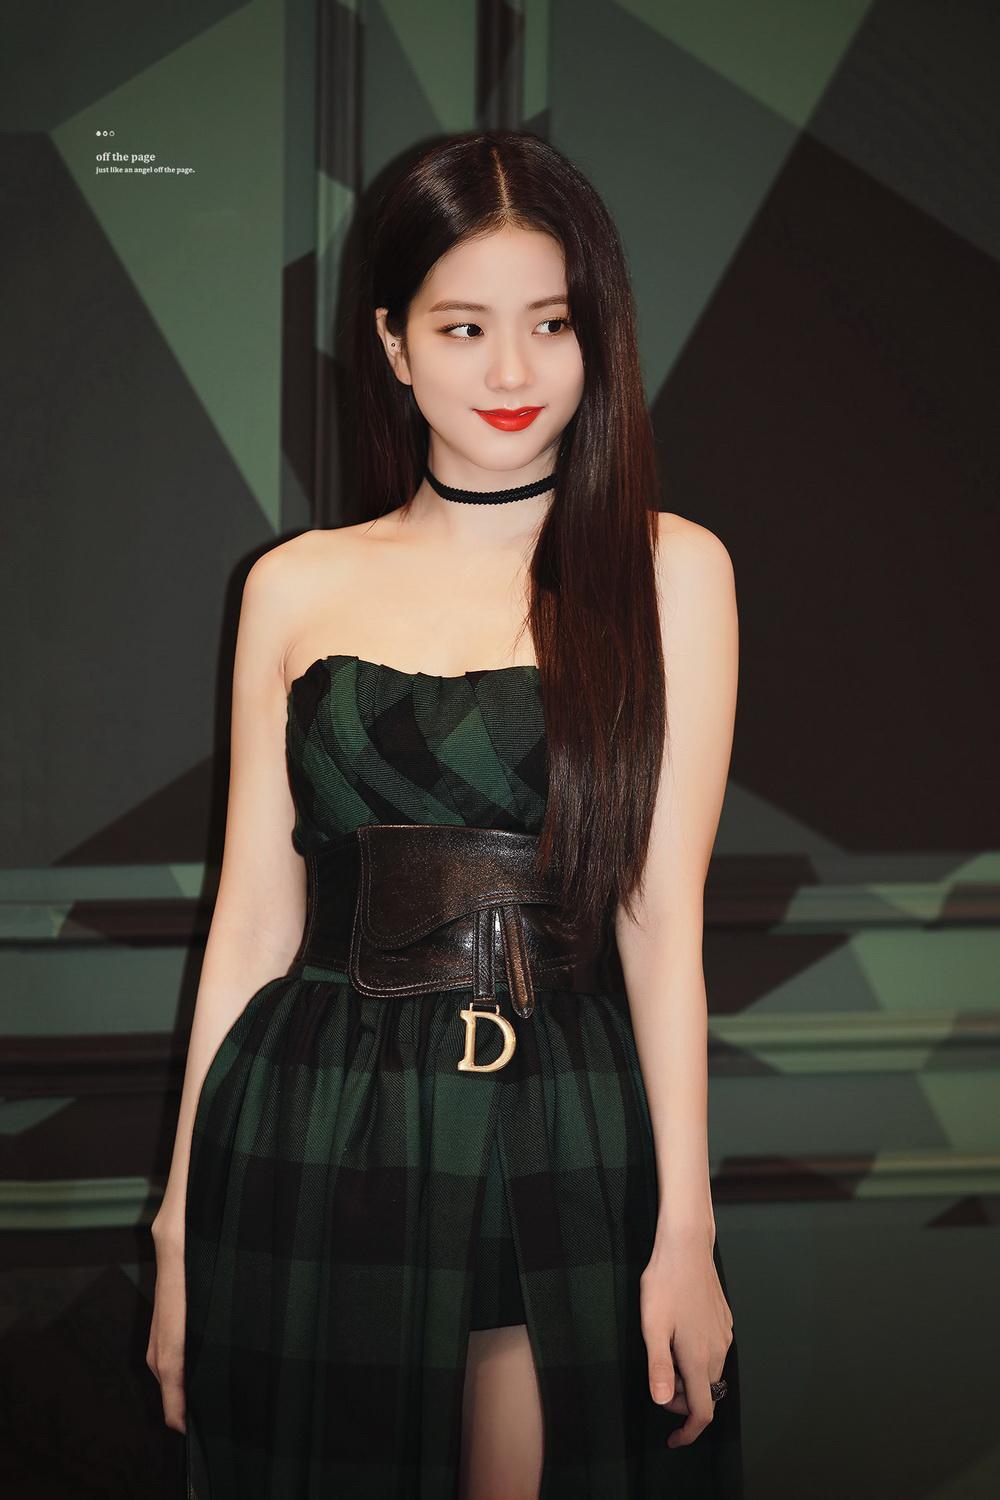 See the Dior fall 2021 looks inspired by Jisoo